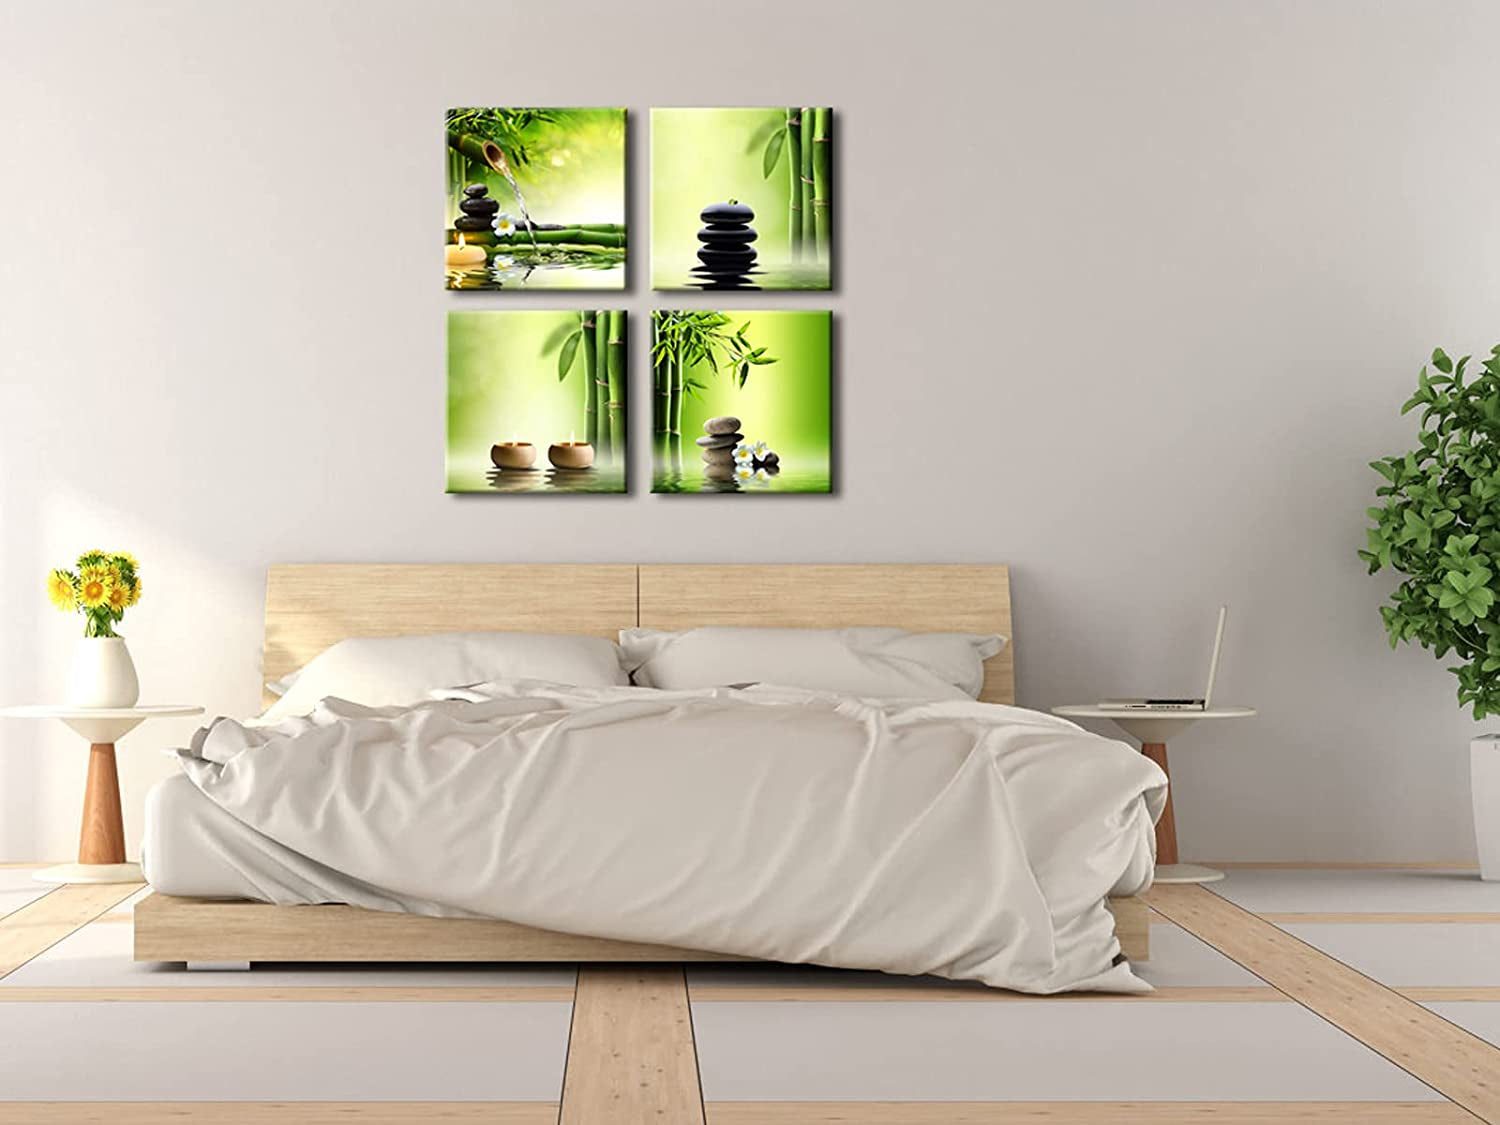 - Modern 4 Panels Stretched and Framed Contemporary Zen Giclee Canvas Prints Perfect Bamboo Green Pictures Paintings on Canvas Wall Art for Home Office Decorations Living Room Bedroom